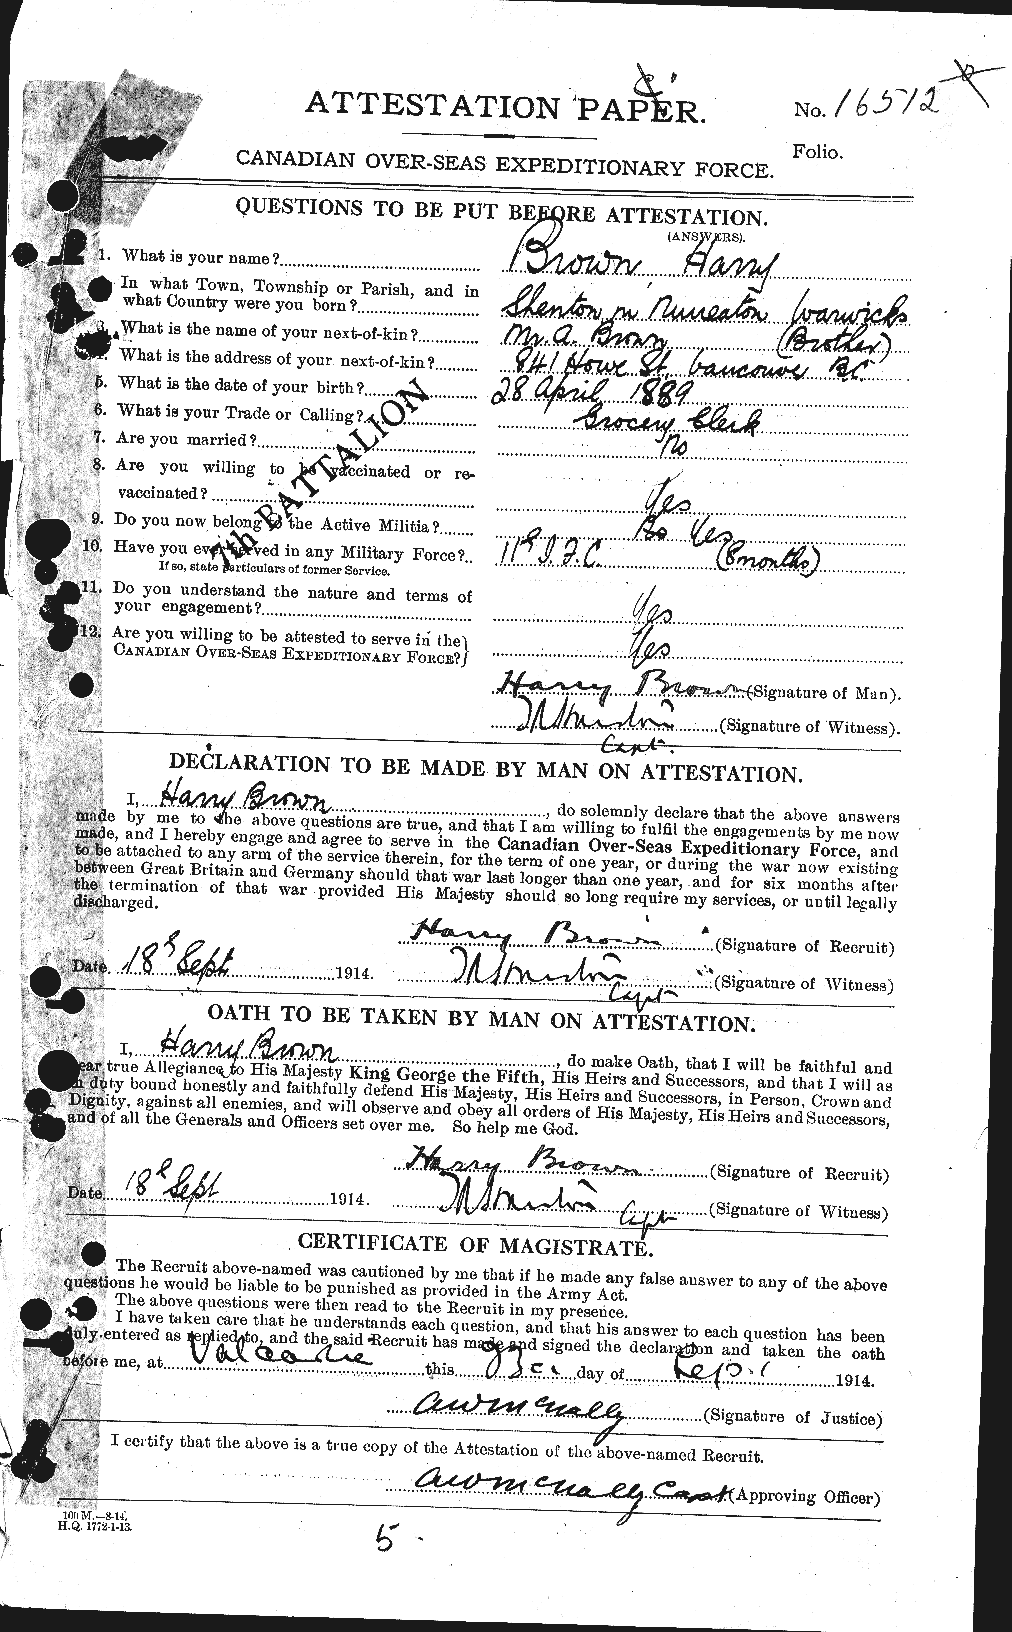 Personnel Records of the First World War - CEF 265427a